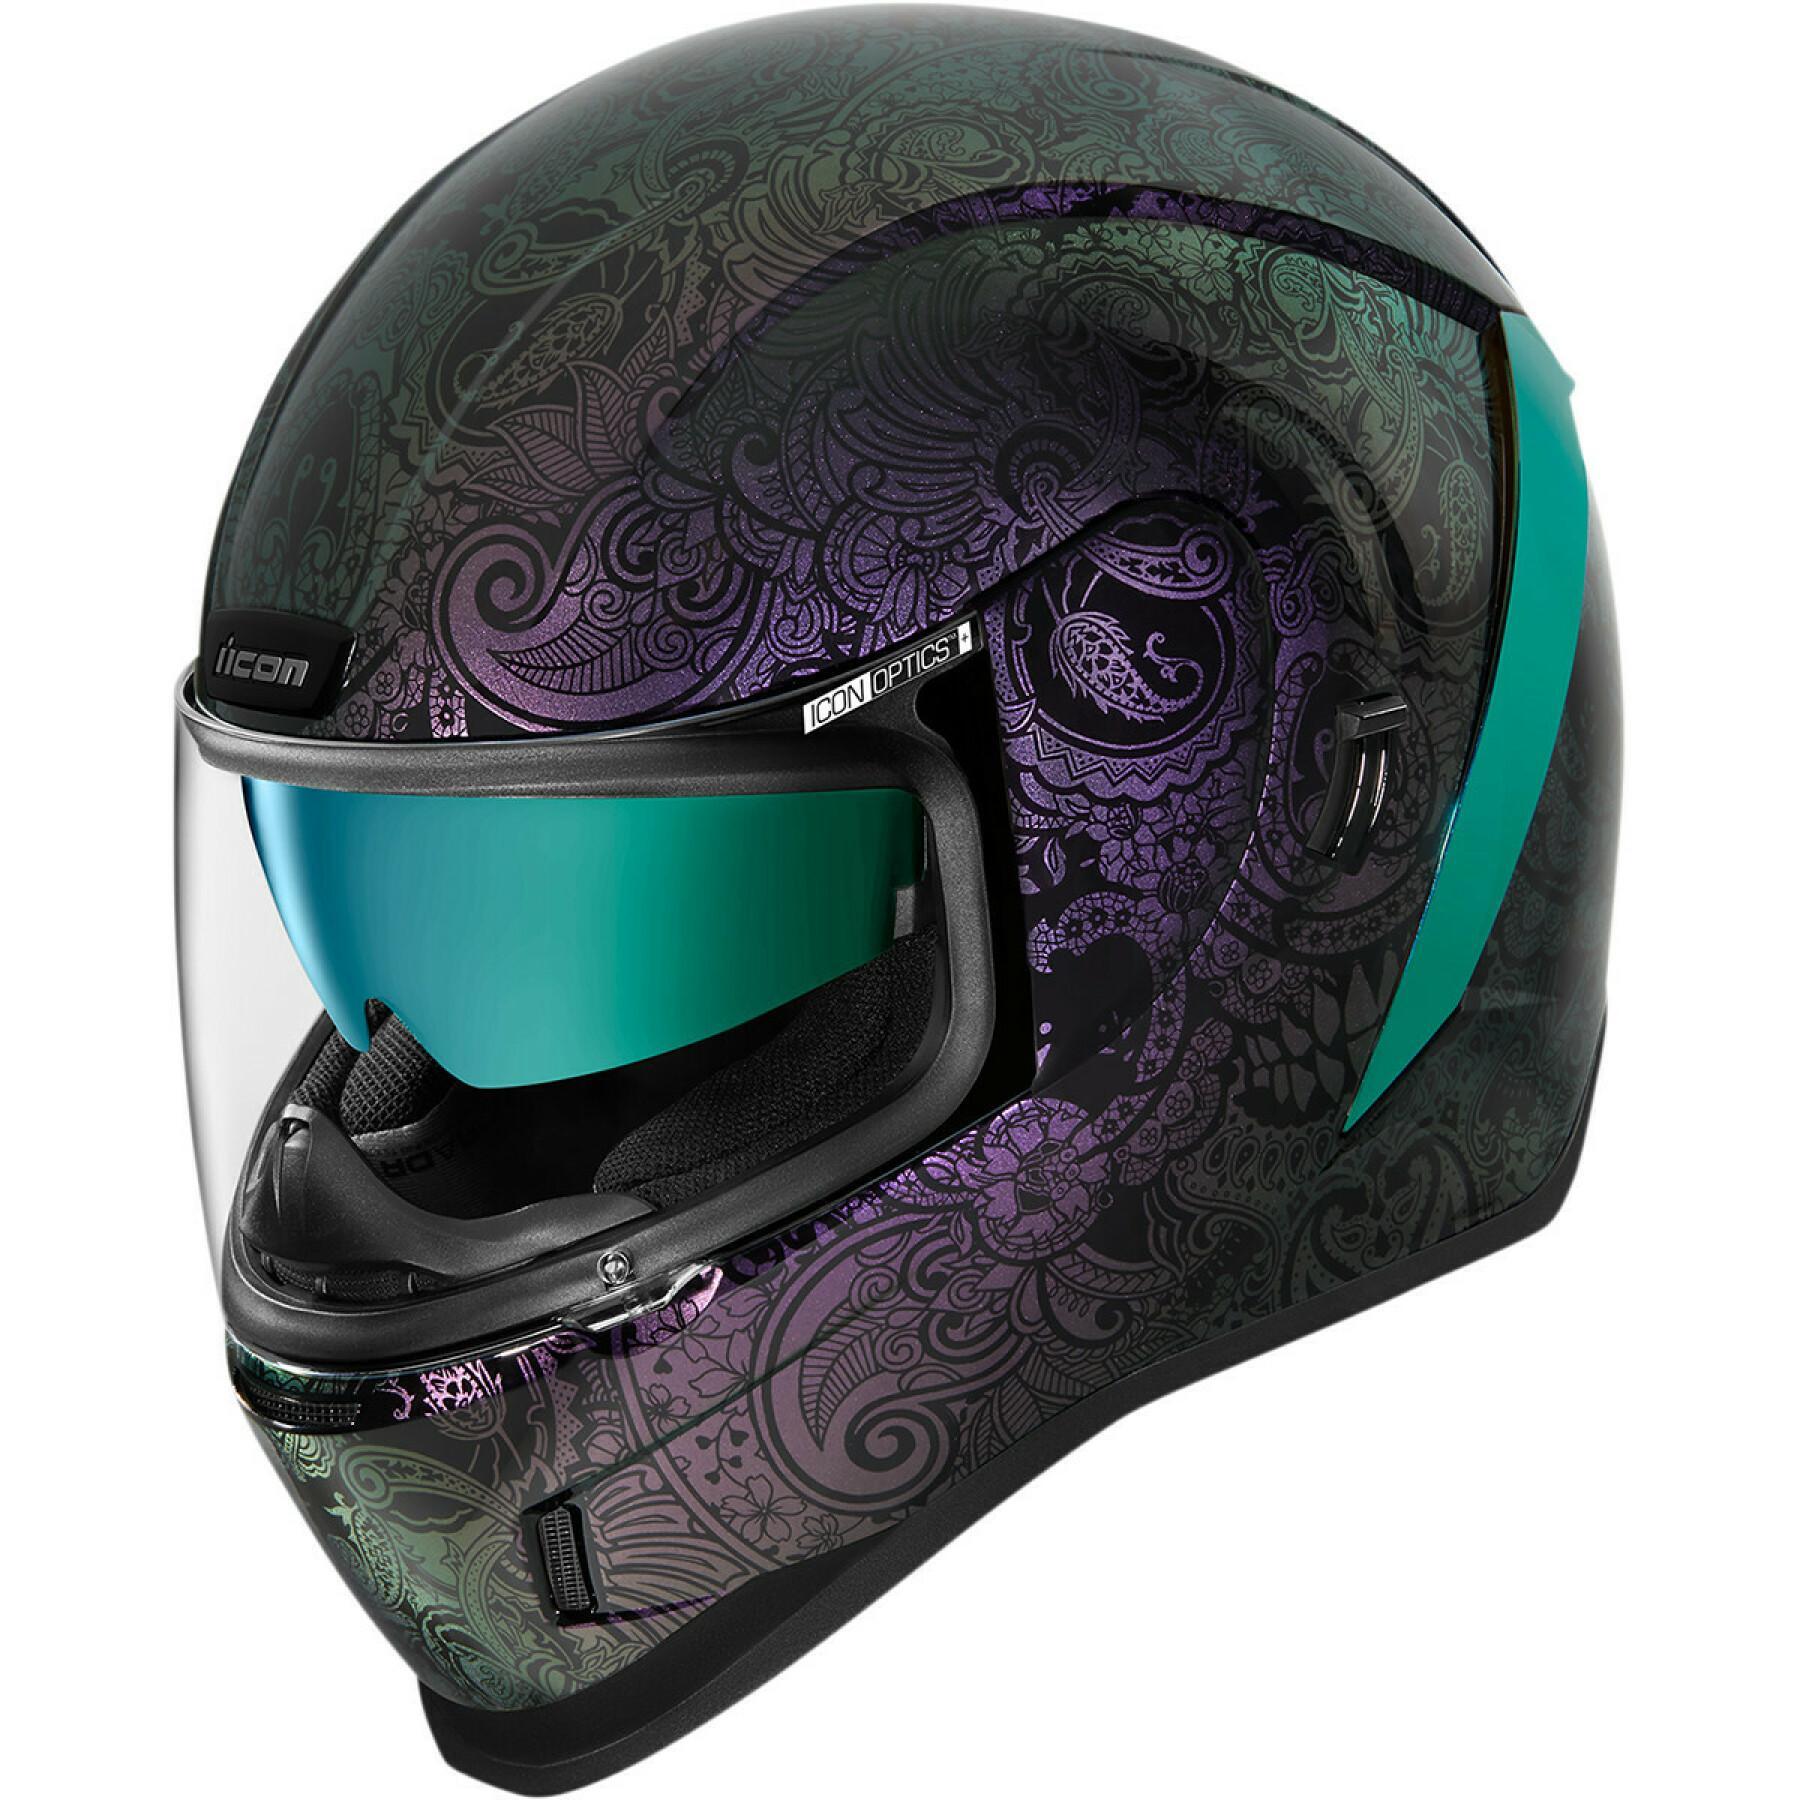 Full face motorcycle helmet Icon afrm chnt-opal pu